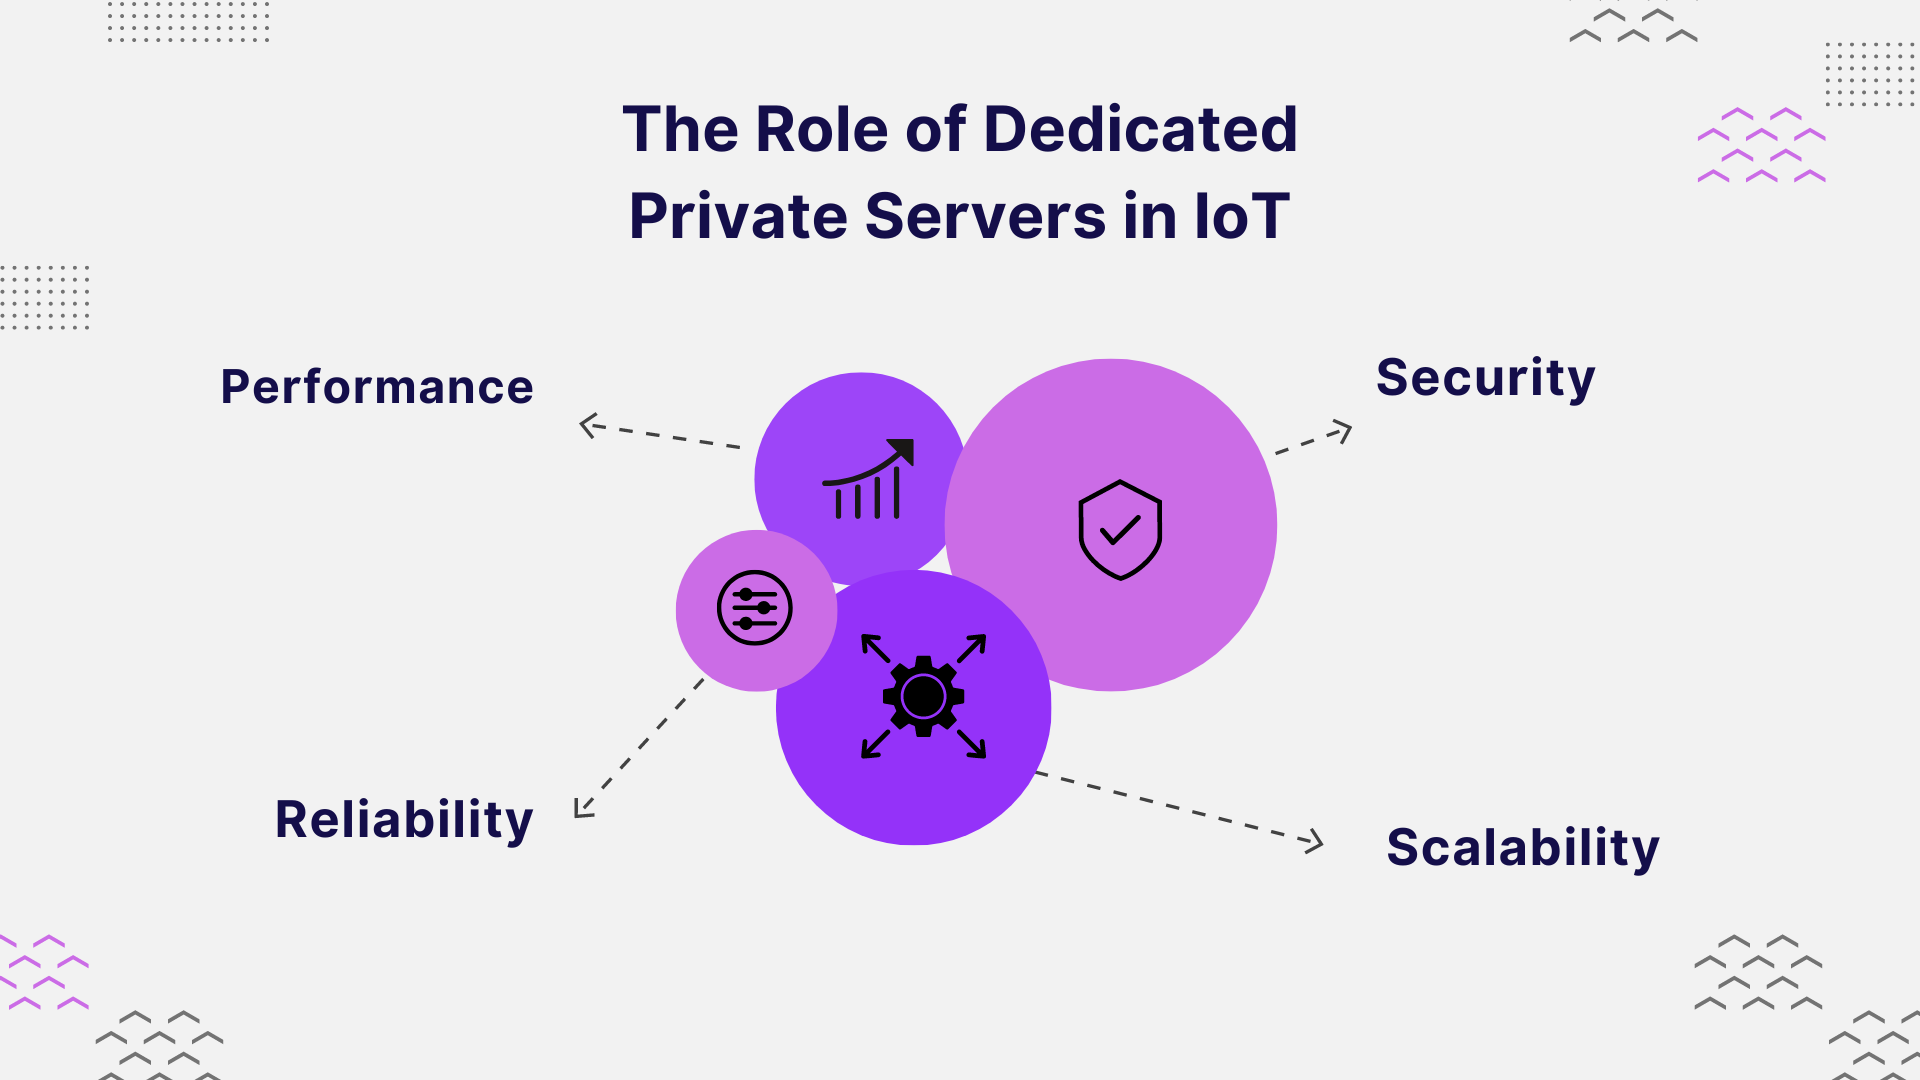 The Role of Dedicated Private Servers in IoT